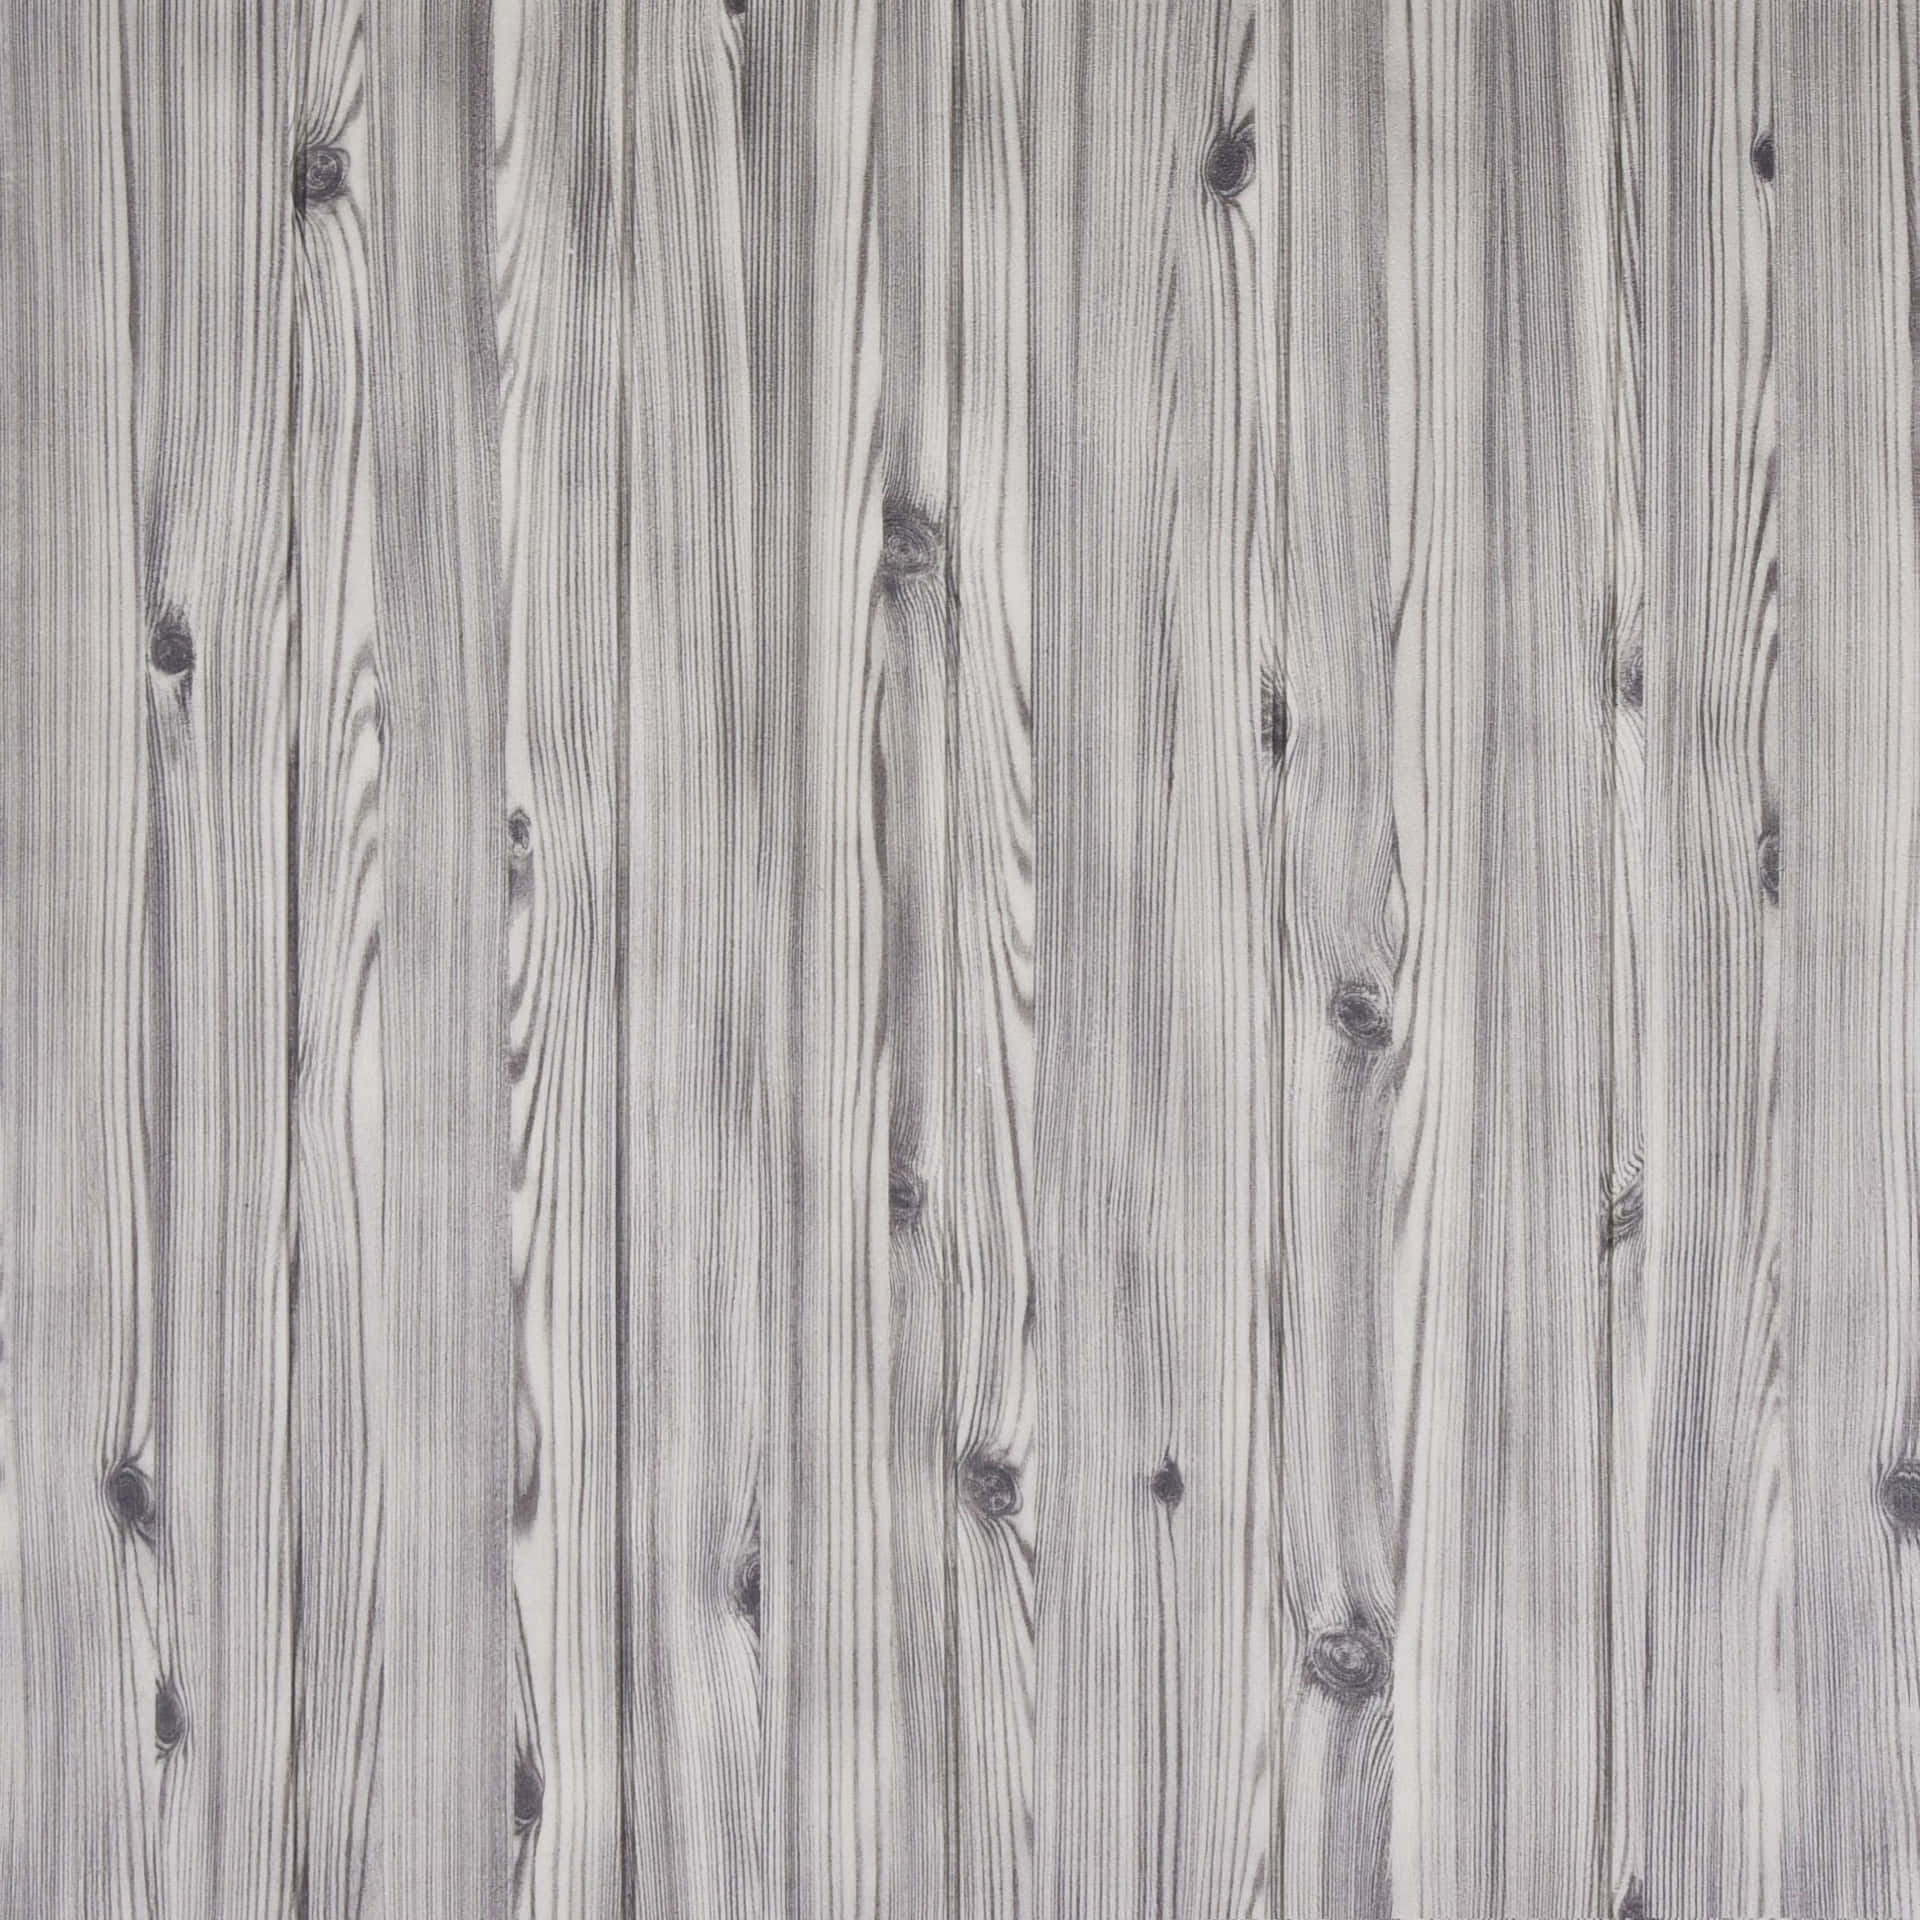 Beautiful Gray Wood Panel for Upgrading Your Home